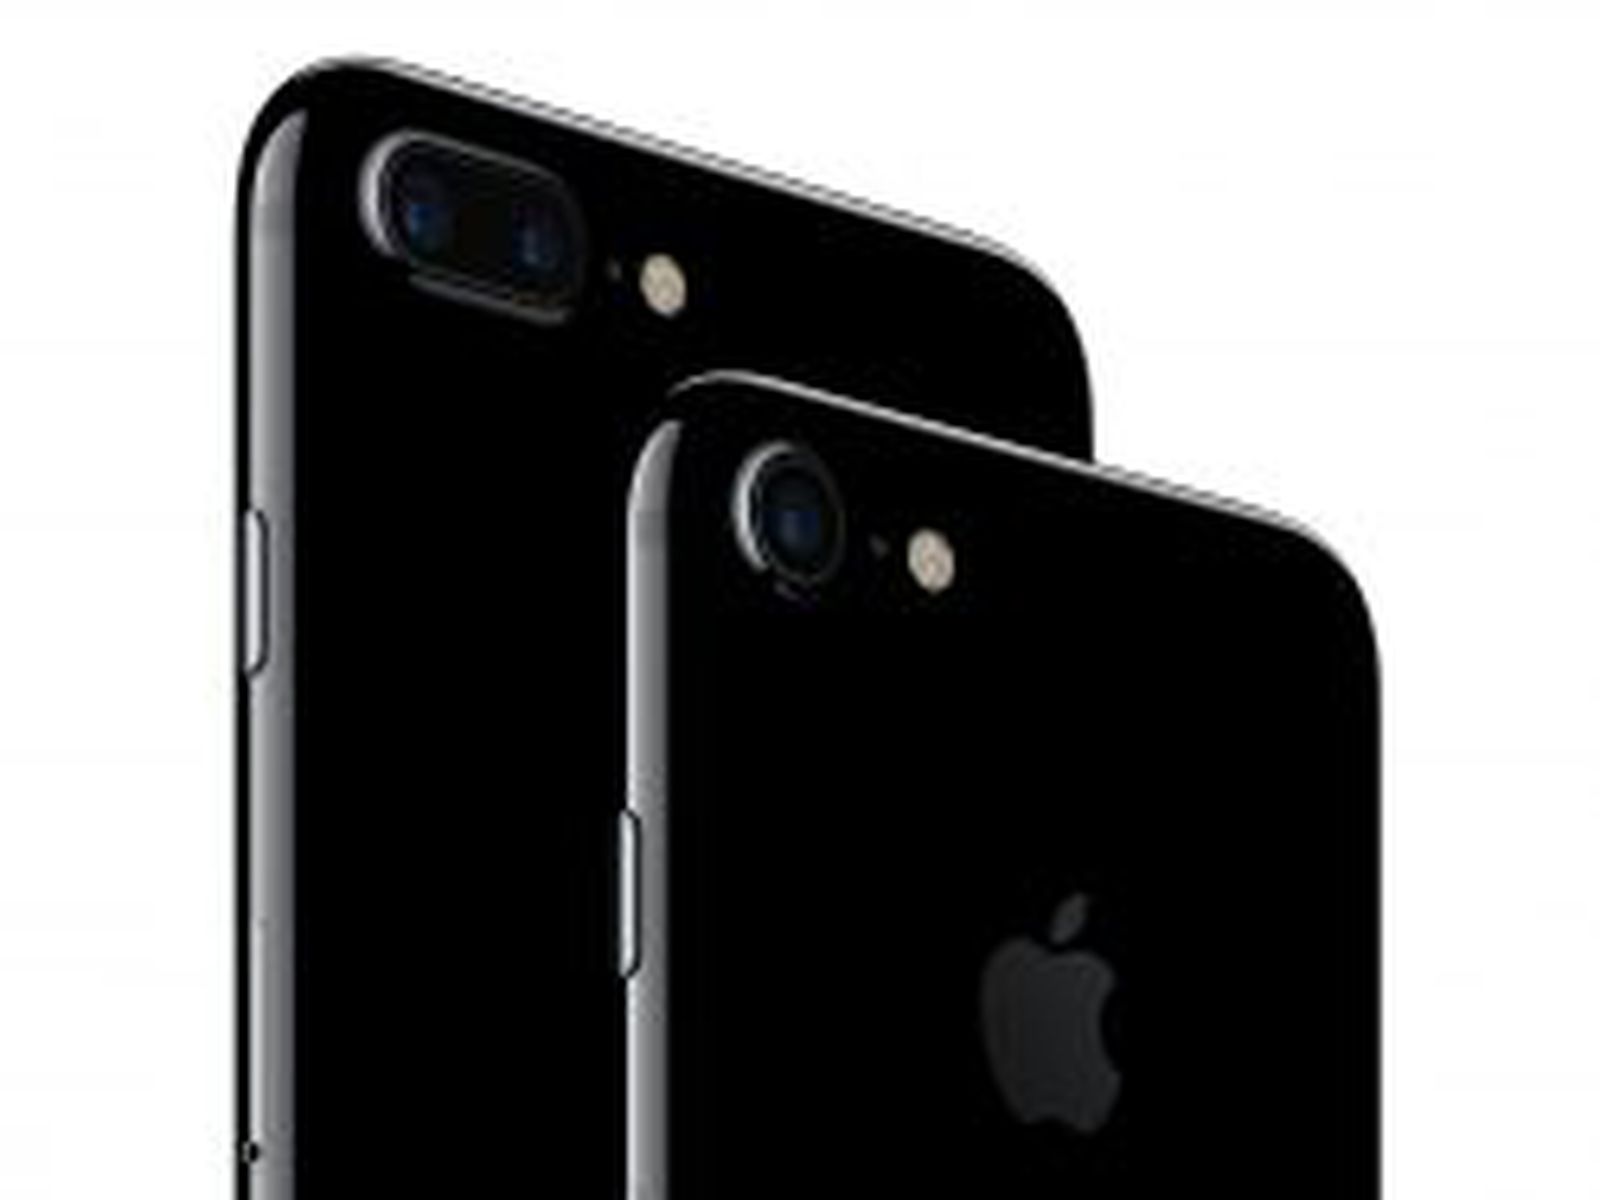 32GB Storage Option Now Available for iPhone 7 in Jet Black Color 